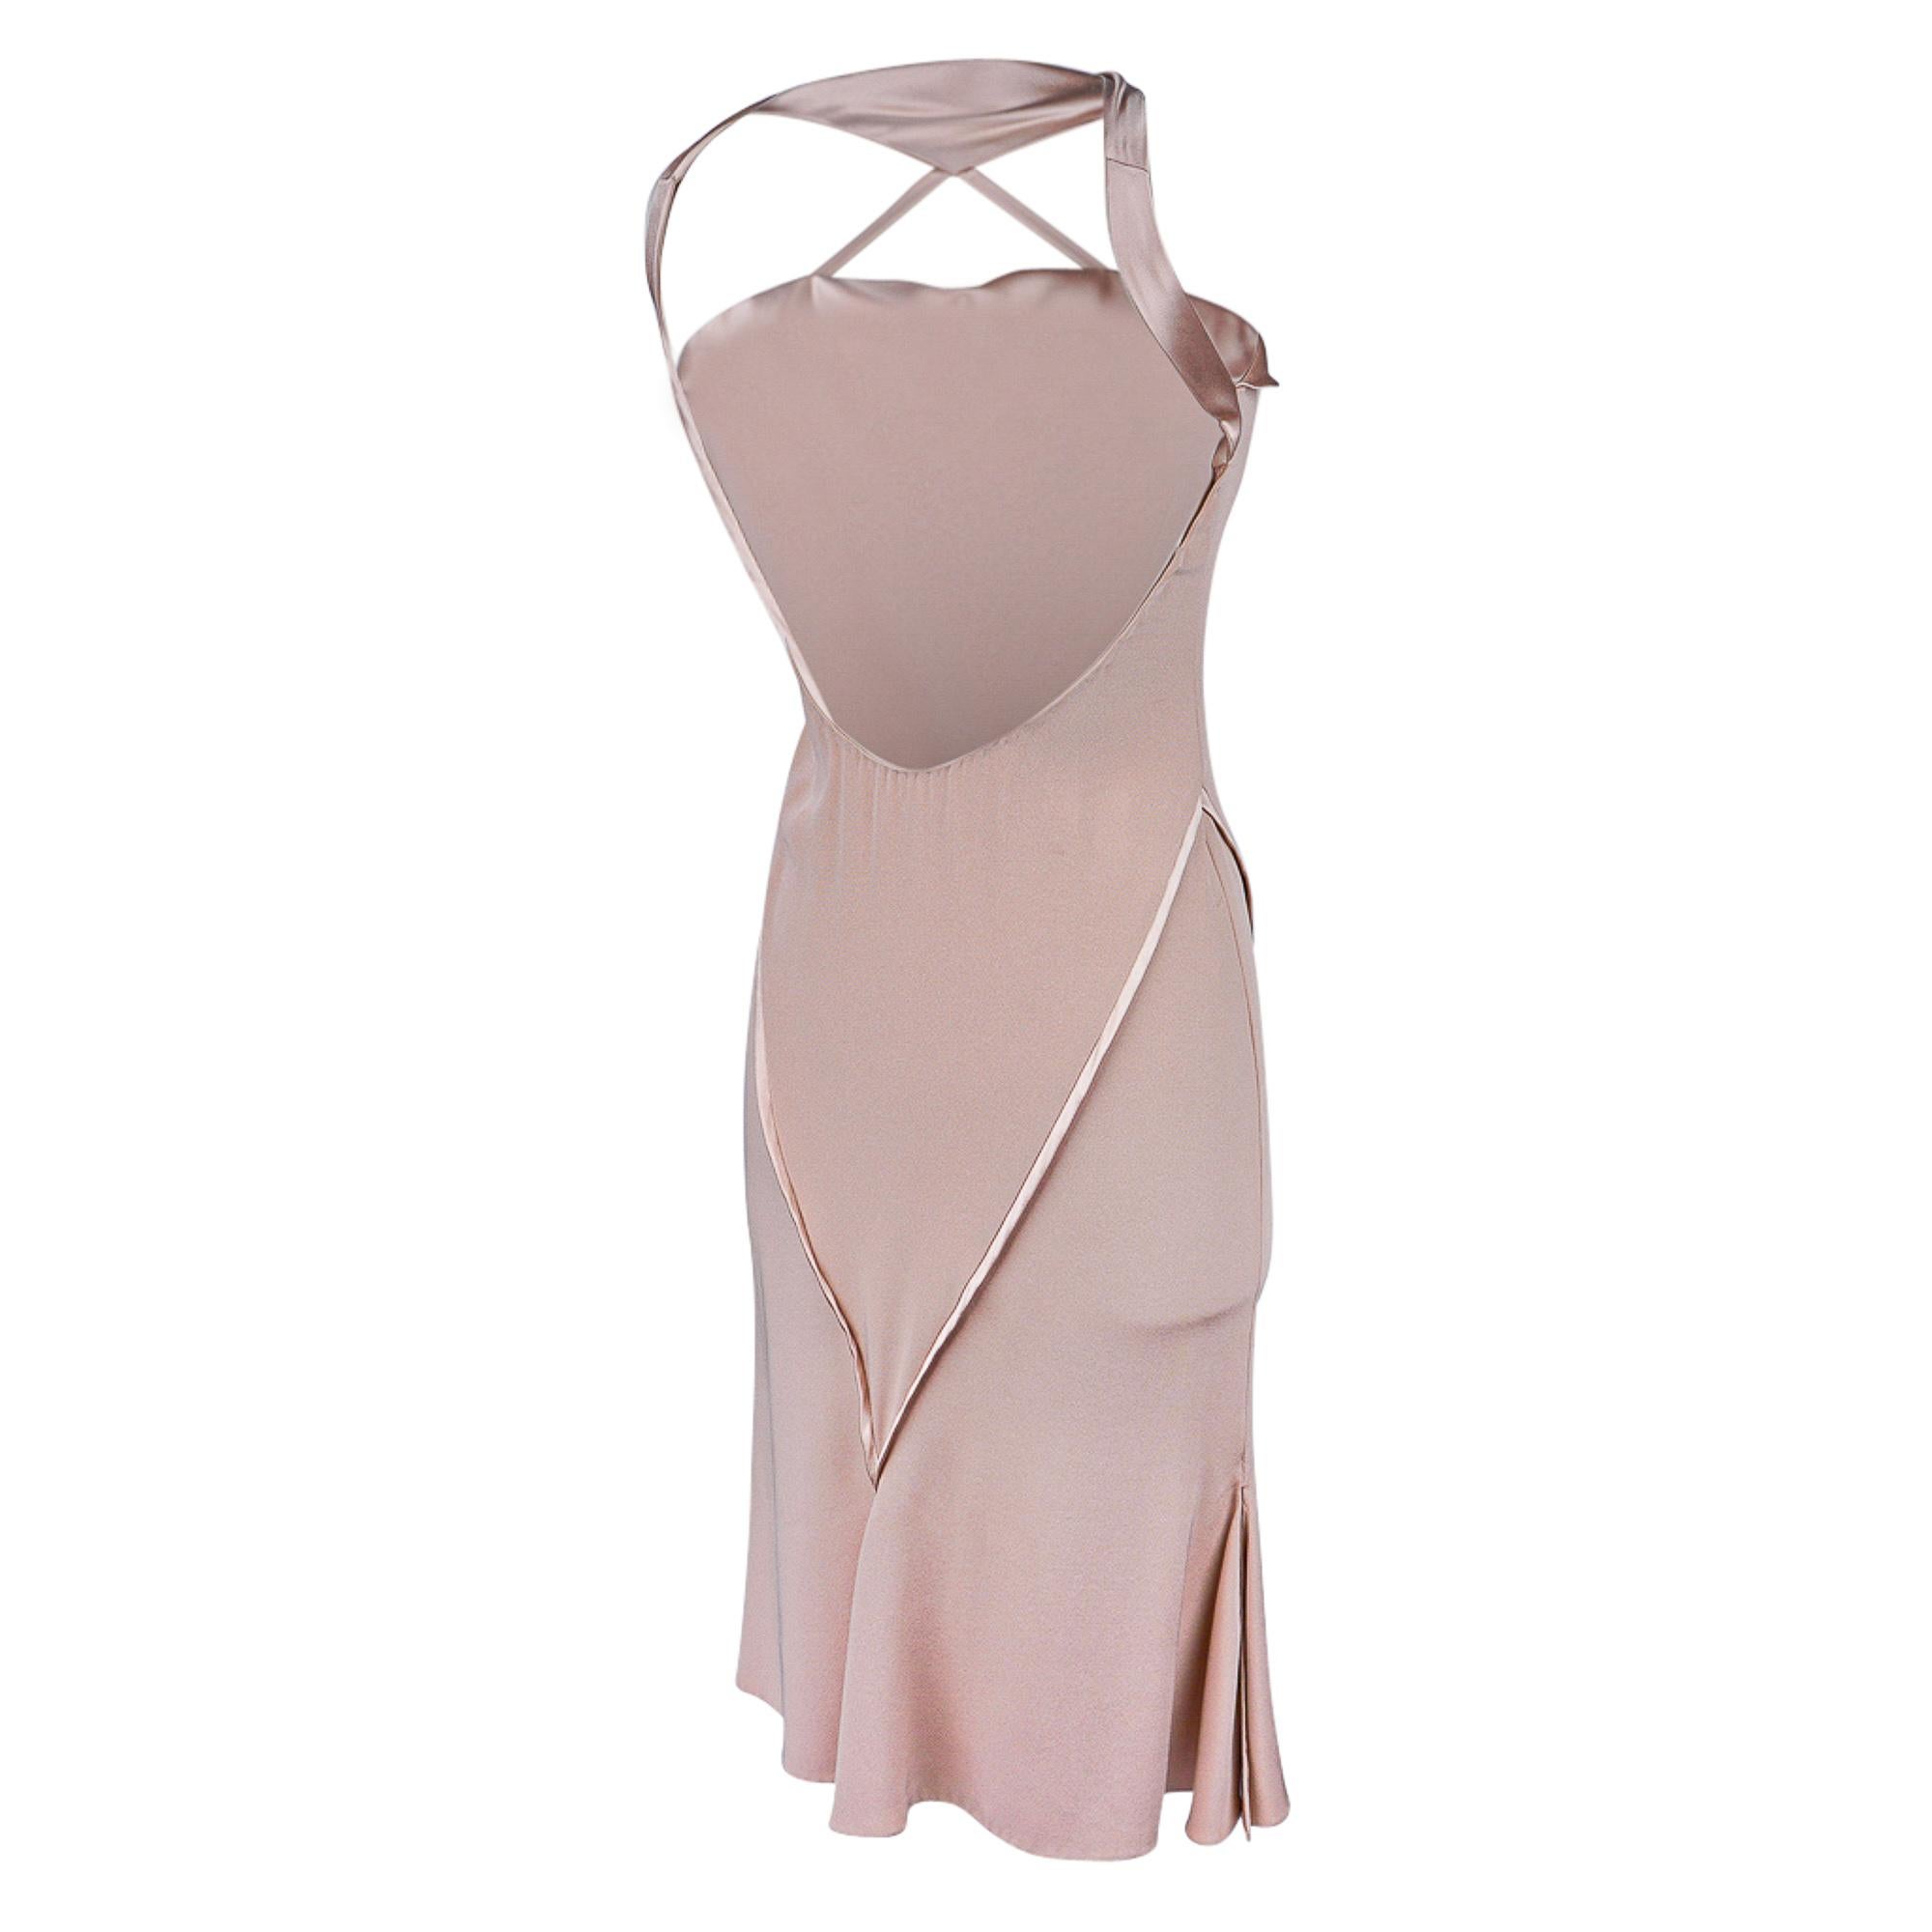 J. Mendel Backless Nude Evening Dress 4 In Excellent Condition For Sale In Miami, FL